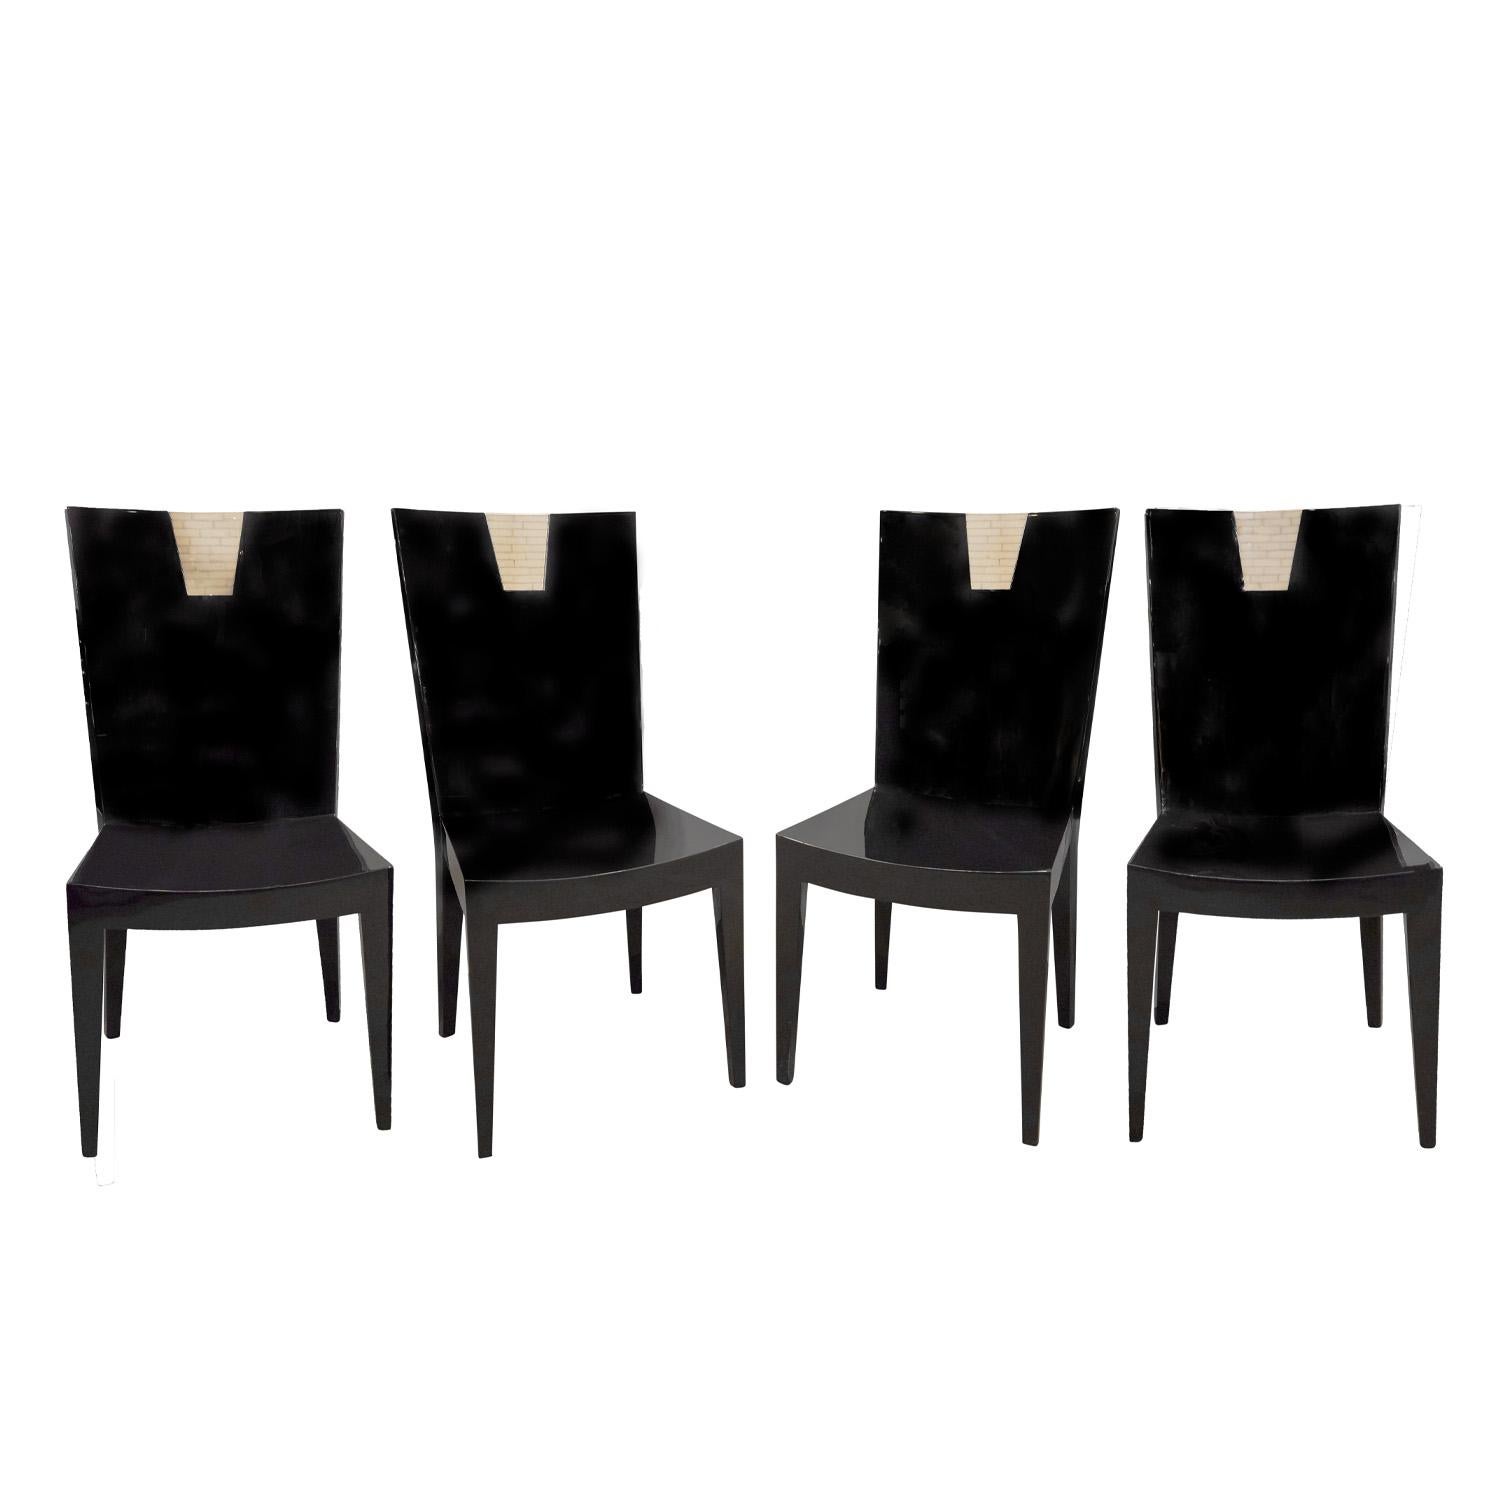 Set of 4 high back game/dining chairs in high gloss black lacquer with bone inlays at top in the style of Karl Springer, custom design, American 1980's. These chairs are modeled on Karl Springer’s JMF Chair, with its curved seat and back. The seat